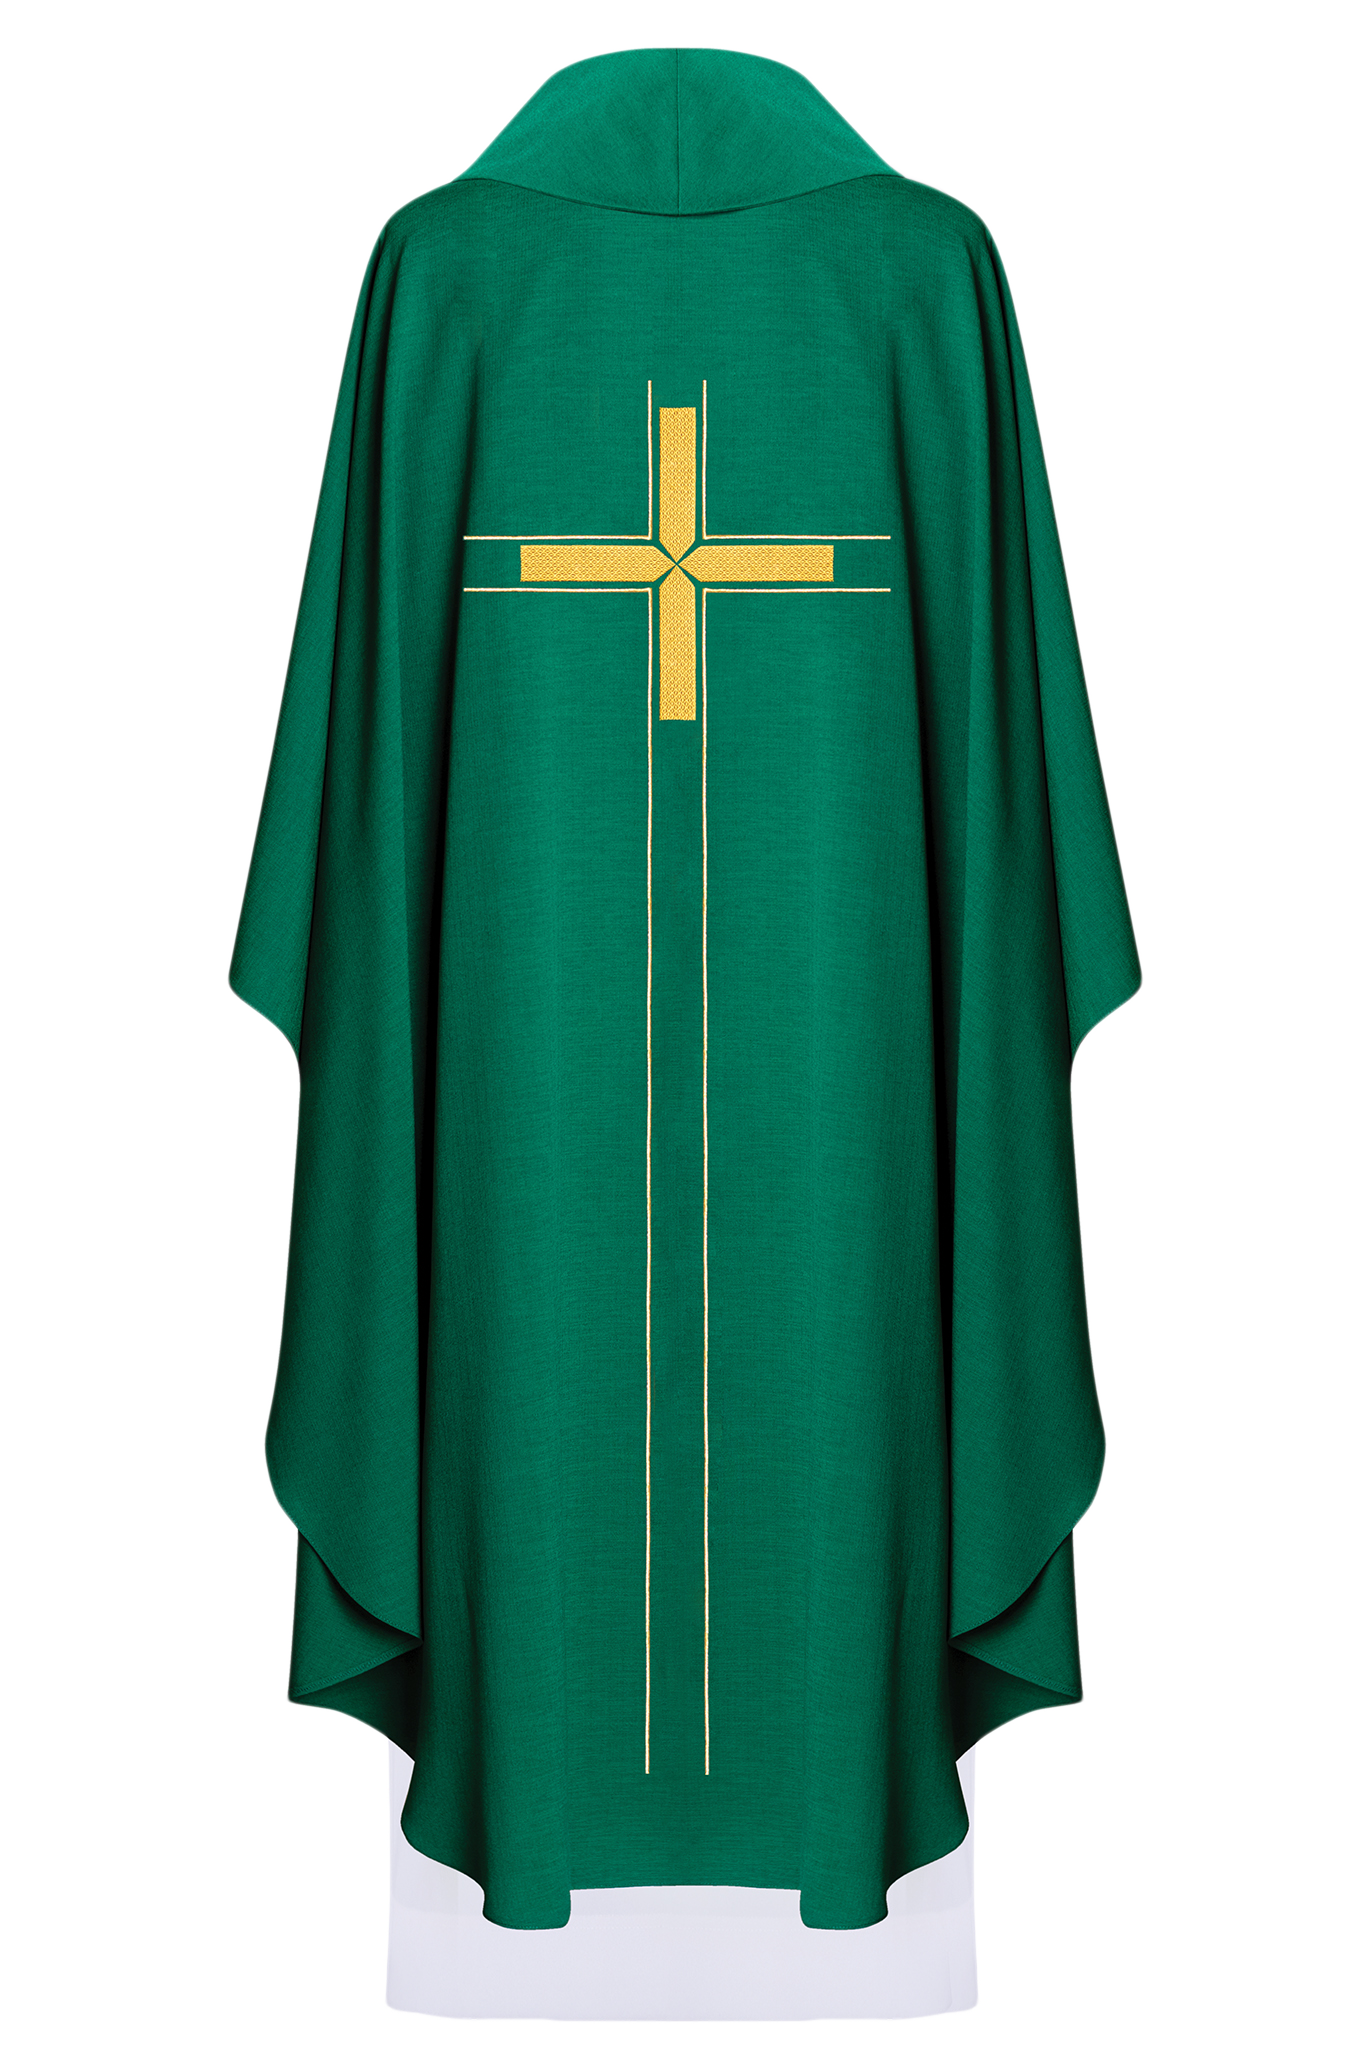 Green chasuble embroidered in minimalist design